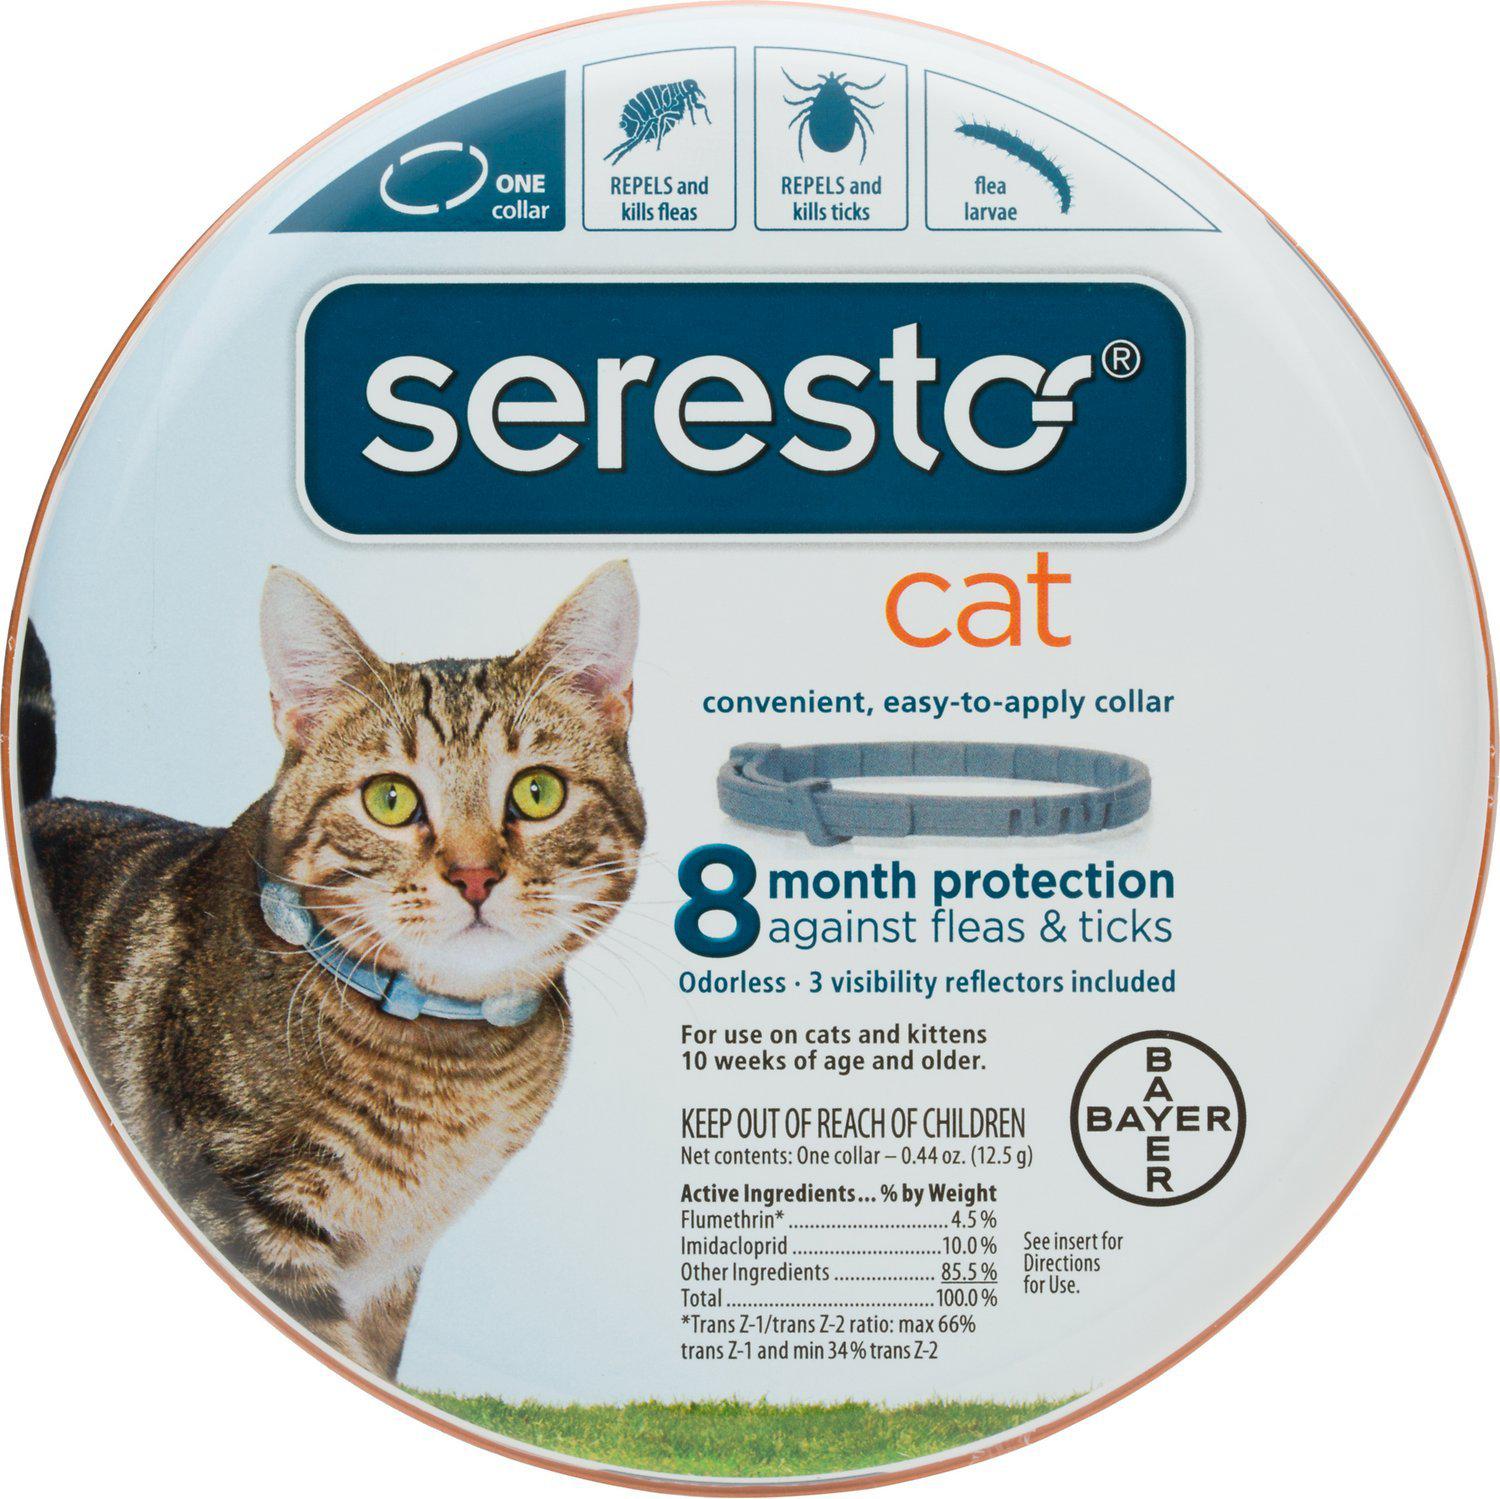 bayer-seresto-collar-fleas-ticks-protection-for-cats-and-kittens-le